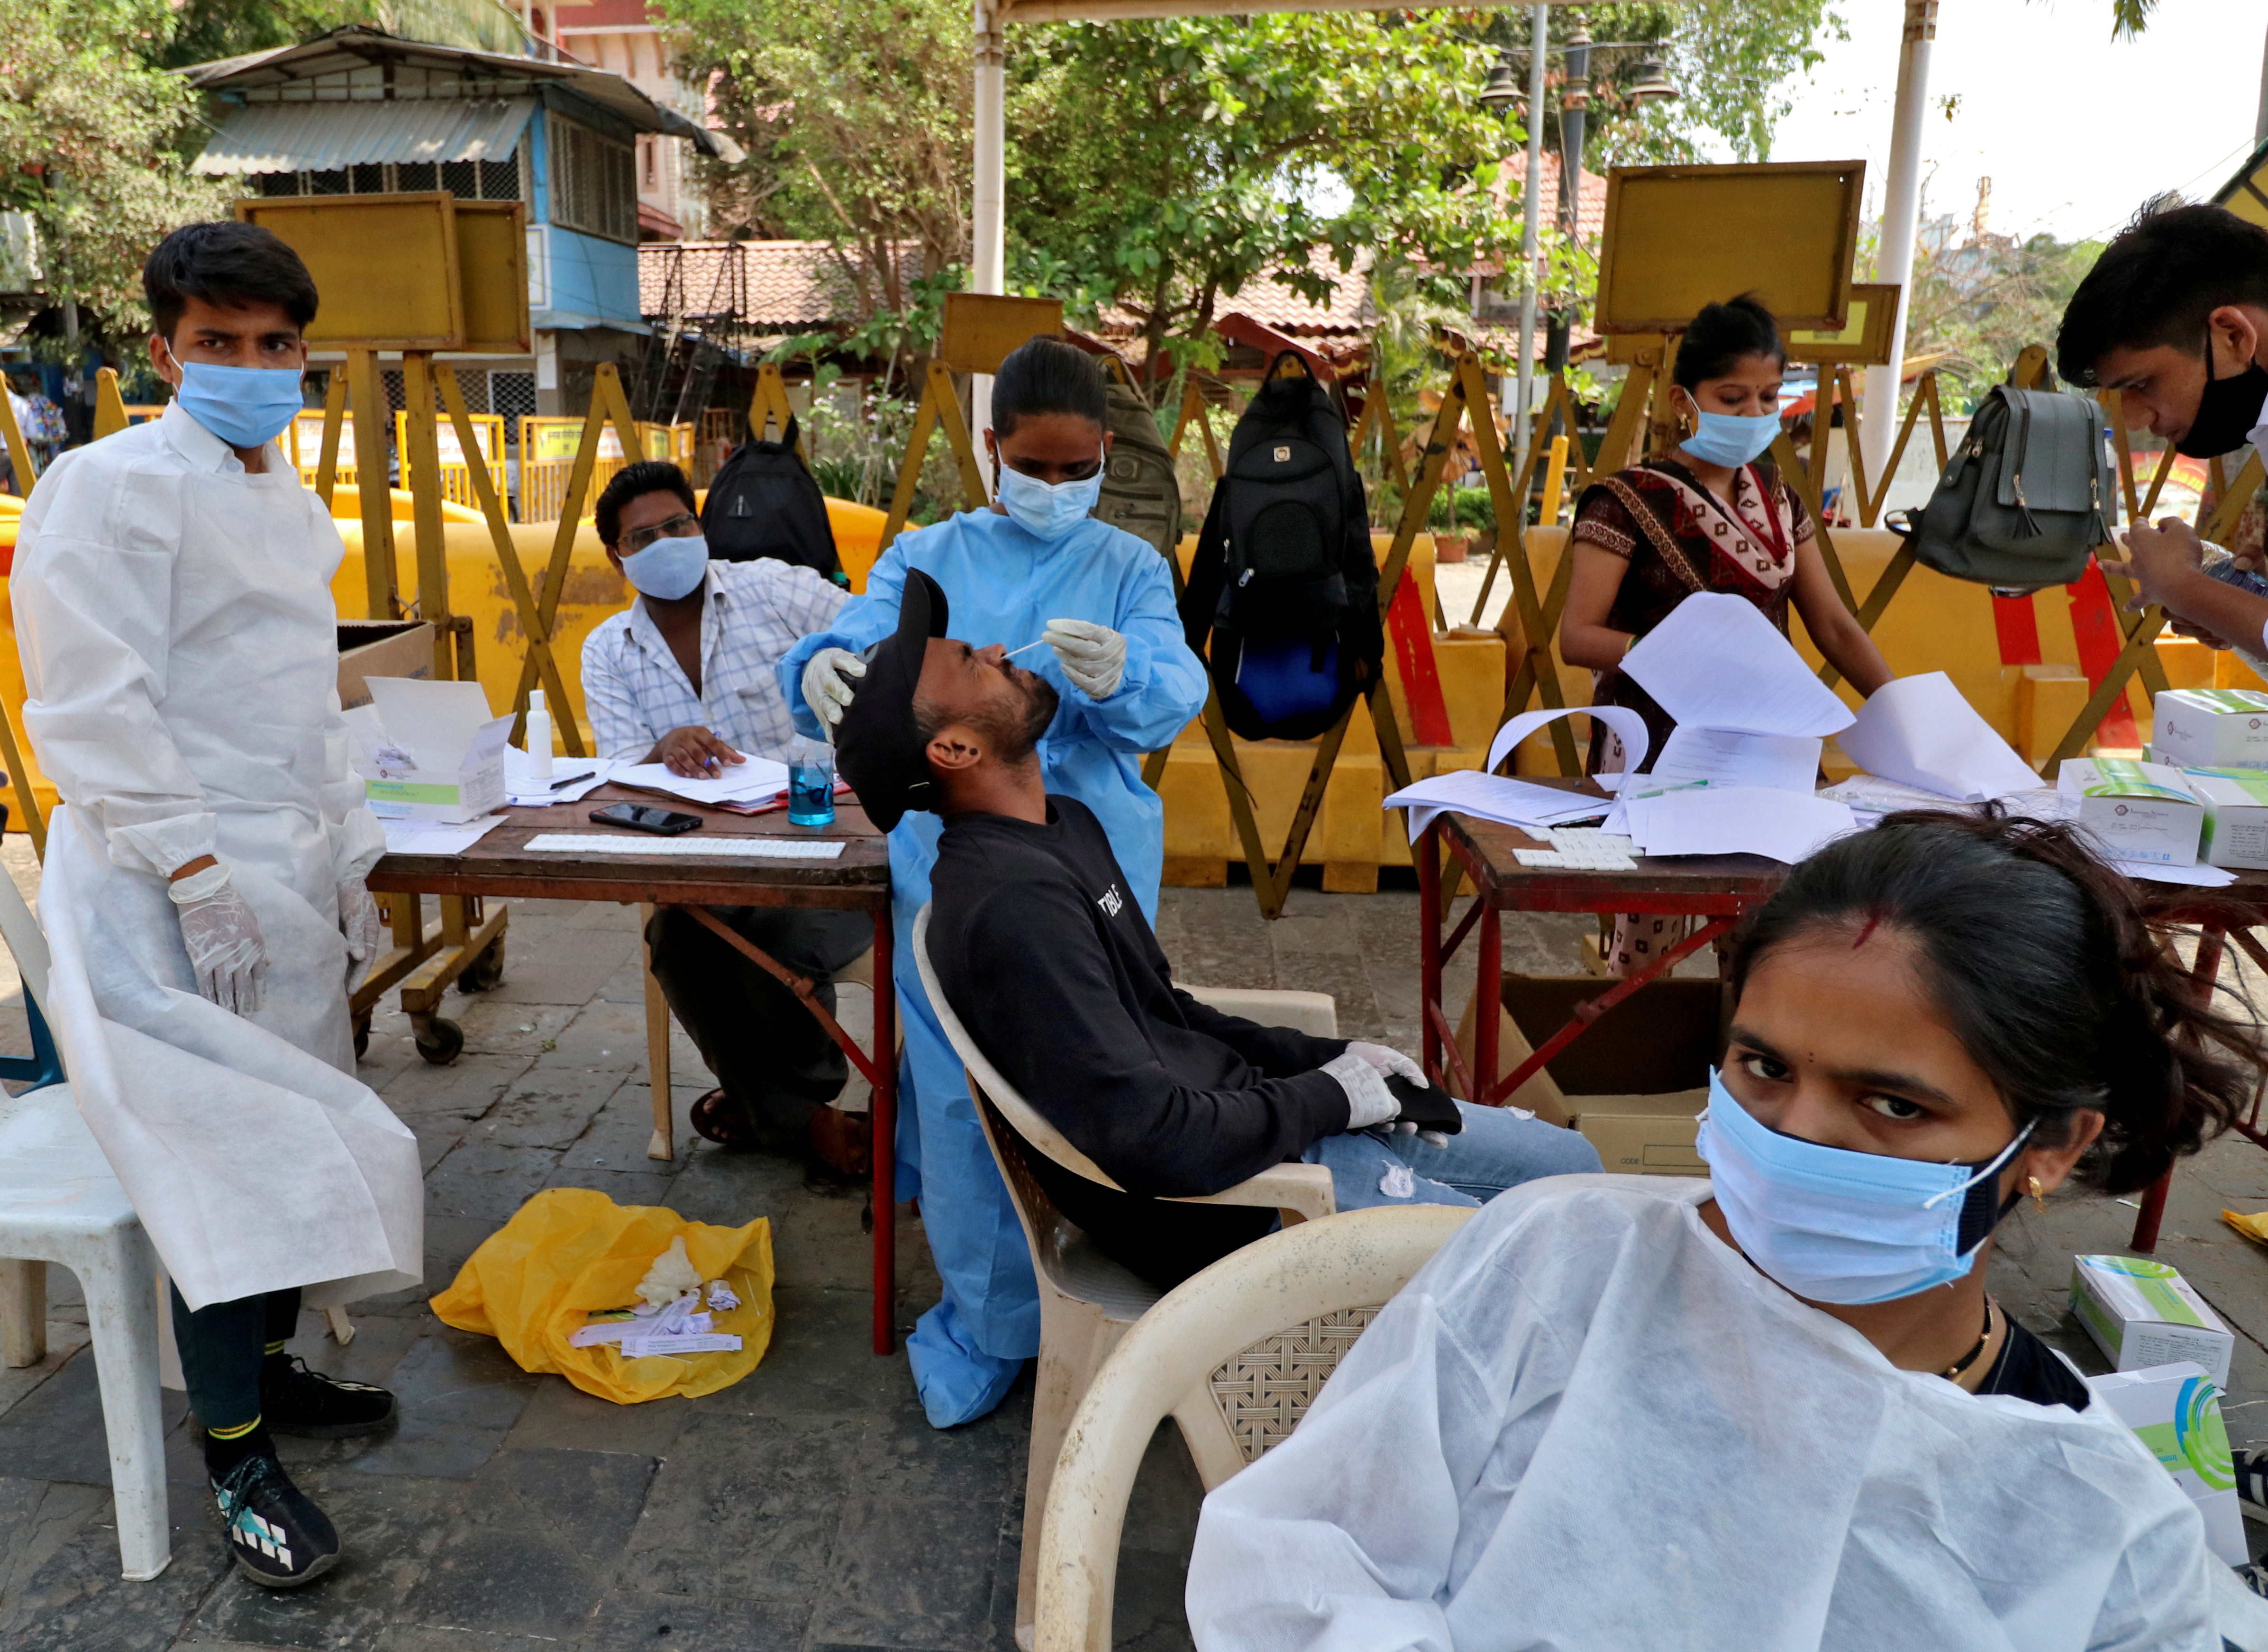 A healthcare worker collects a swab sample from a man during a rapid antigen testing campaign for the coronavirus disease (COVID-19), in Mumbai